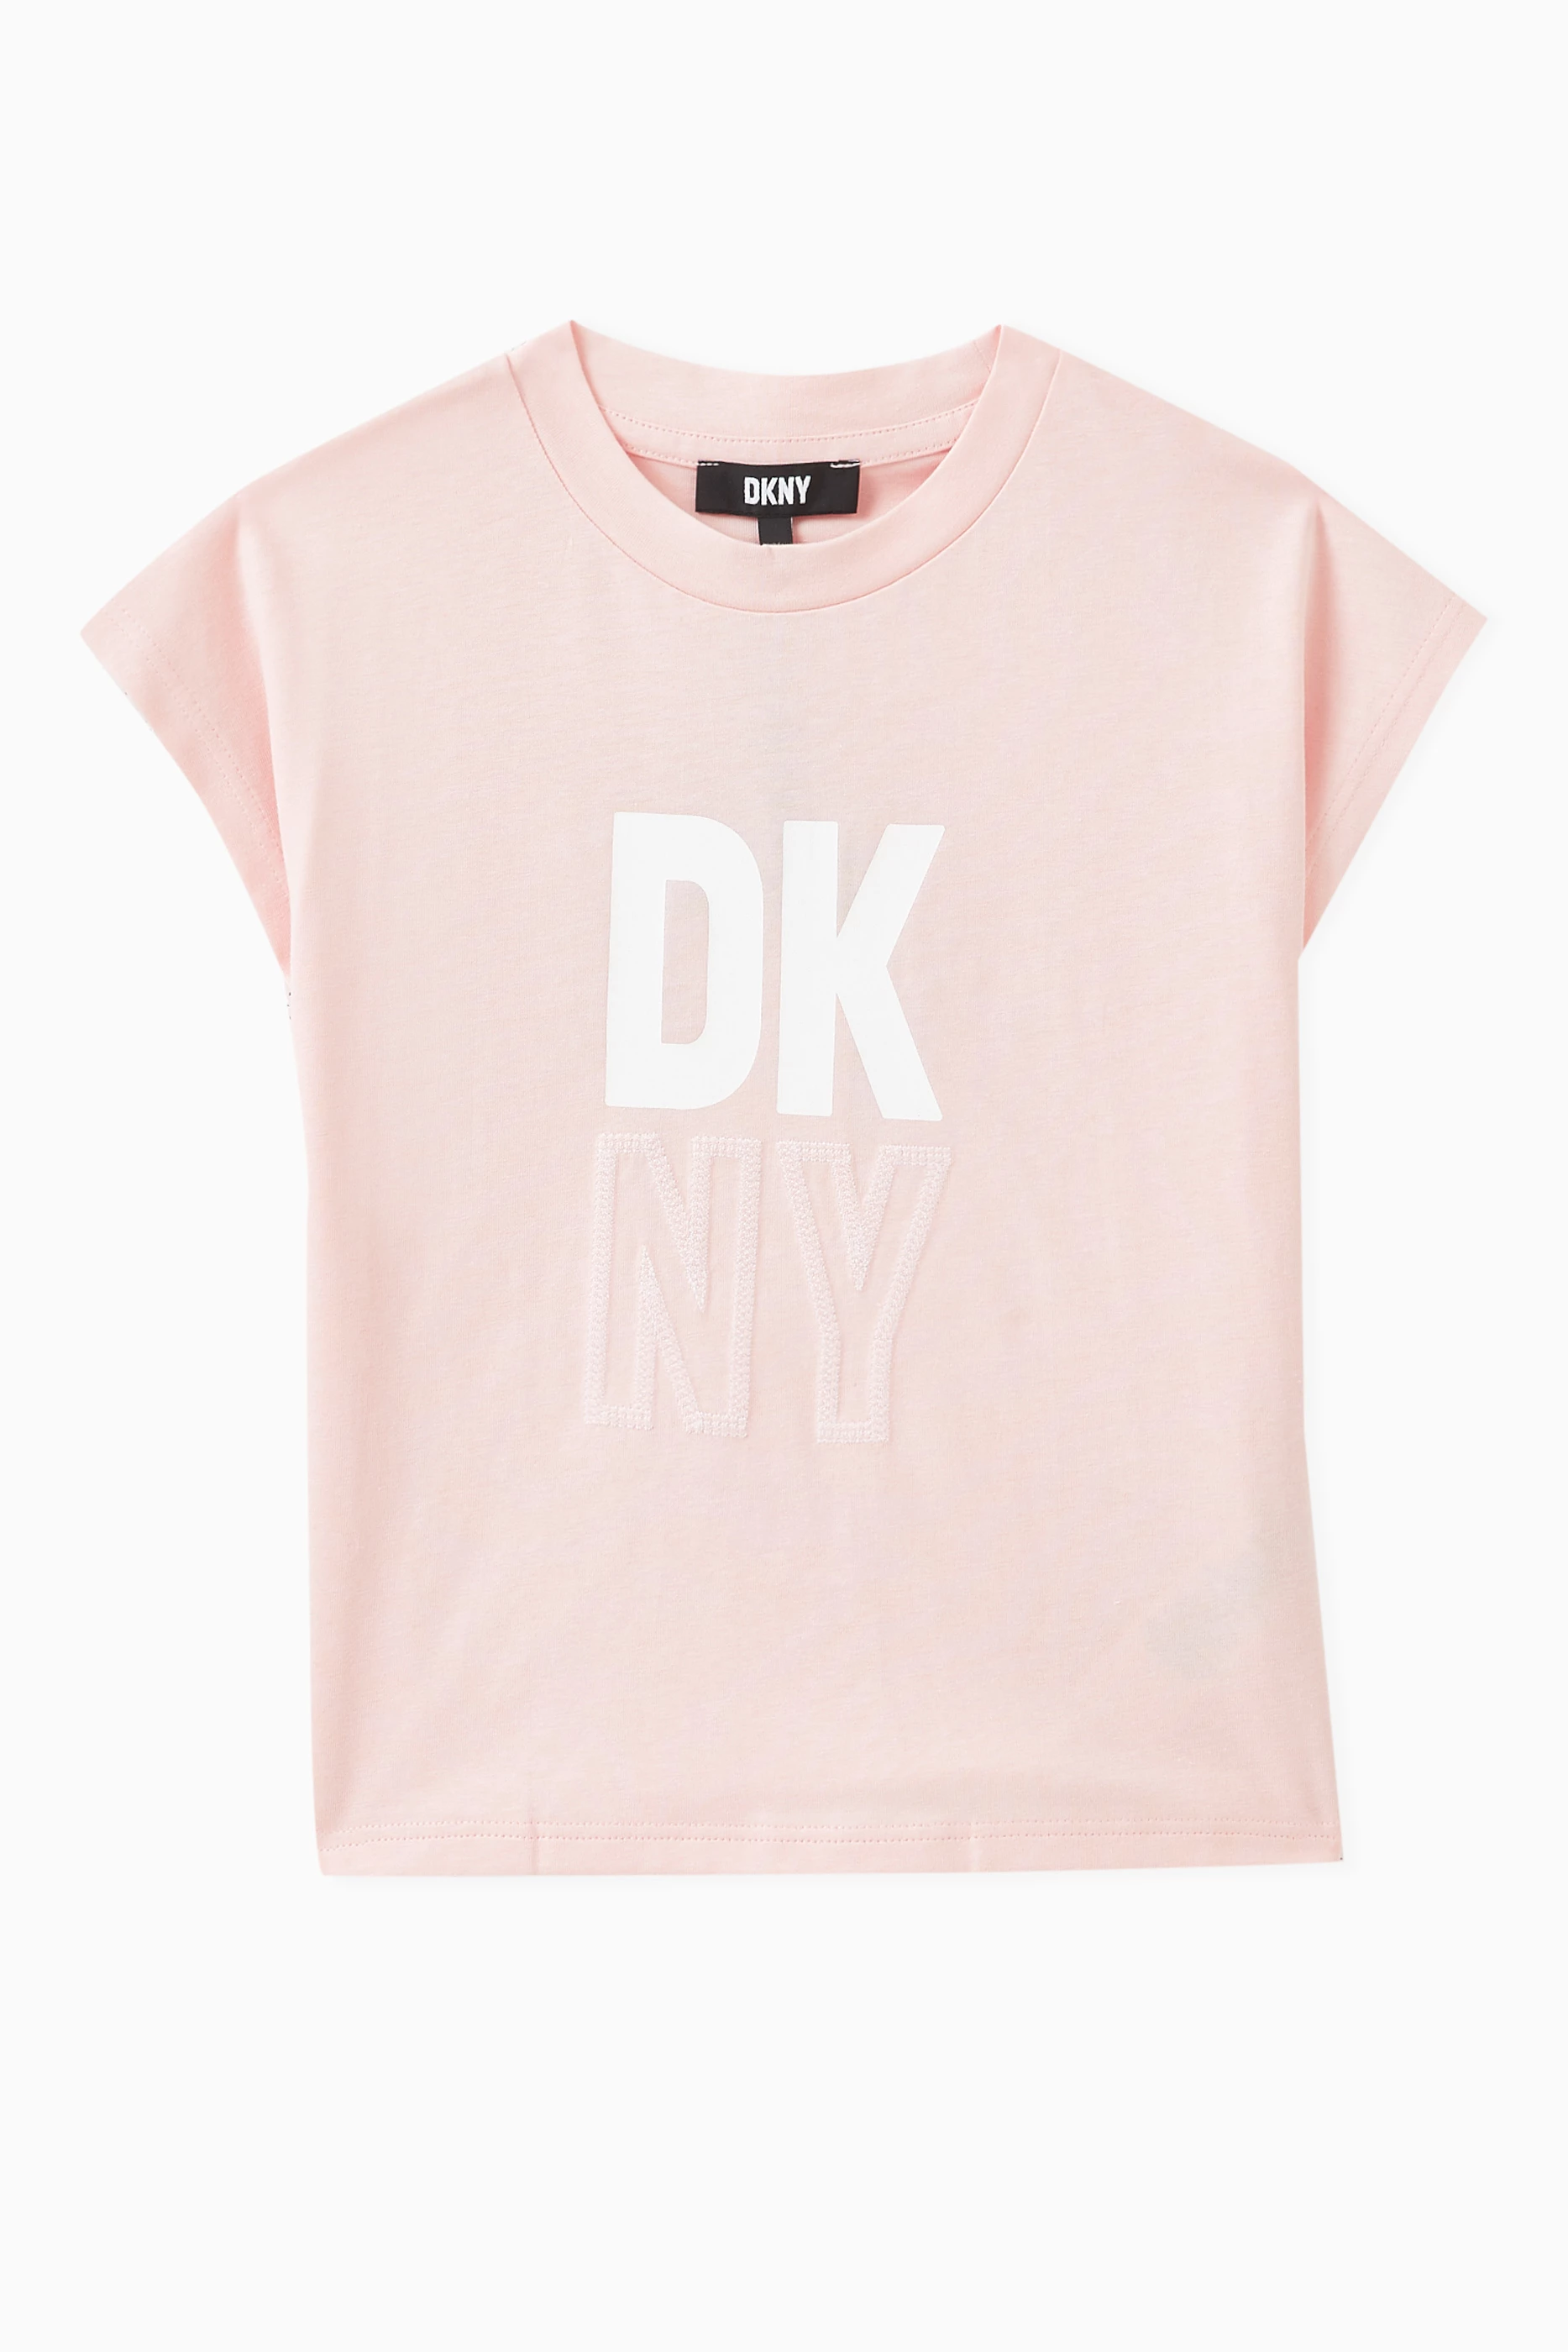 Buy DKNY Pink Logo T-shirt in Cotton Jersey for Girls in Saudi